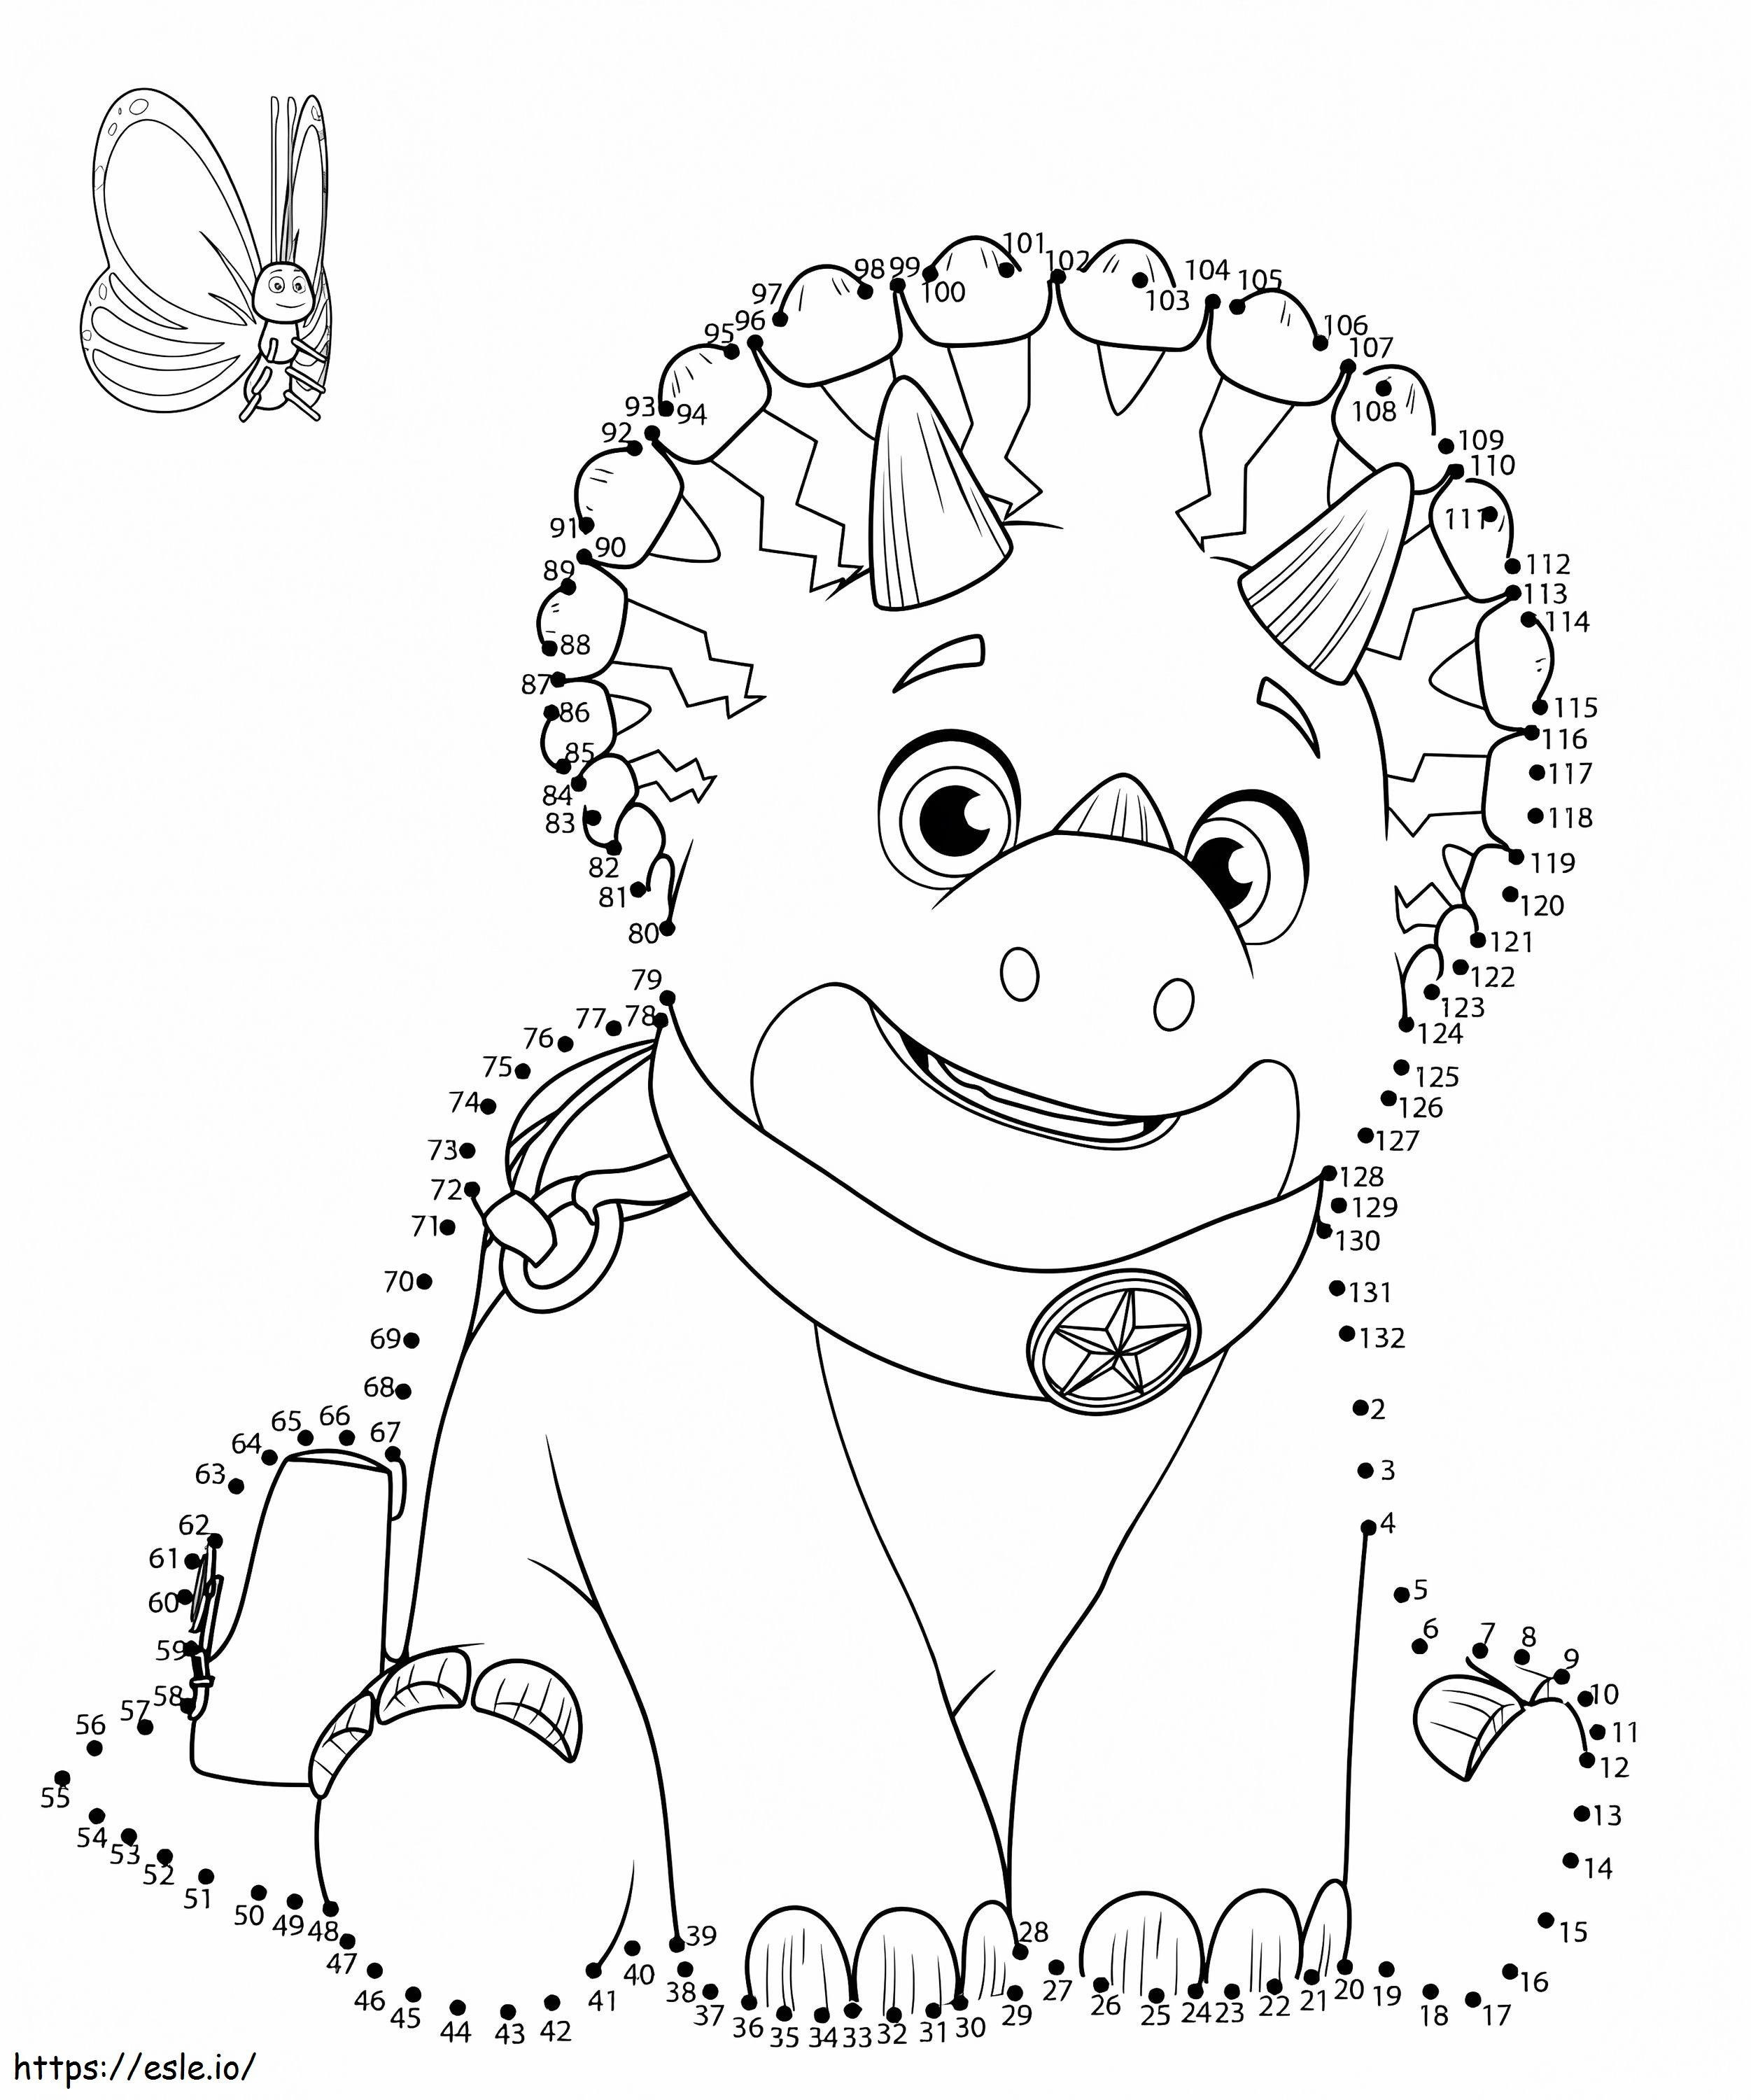 Connecting Dots Dino Ranch coloring page